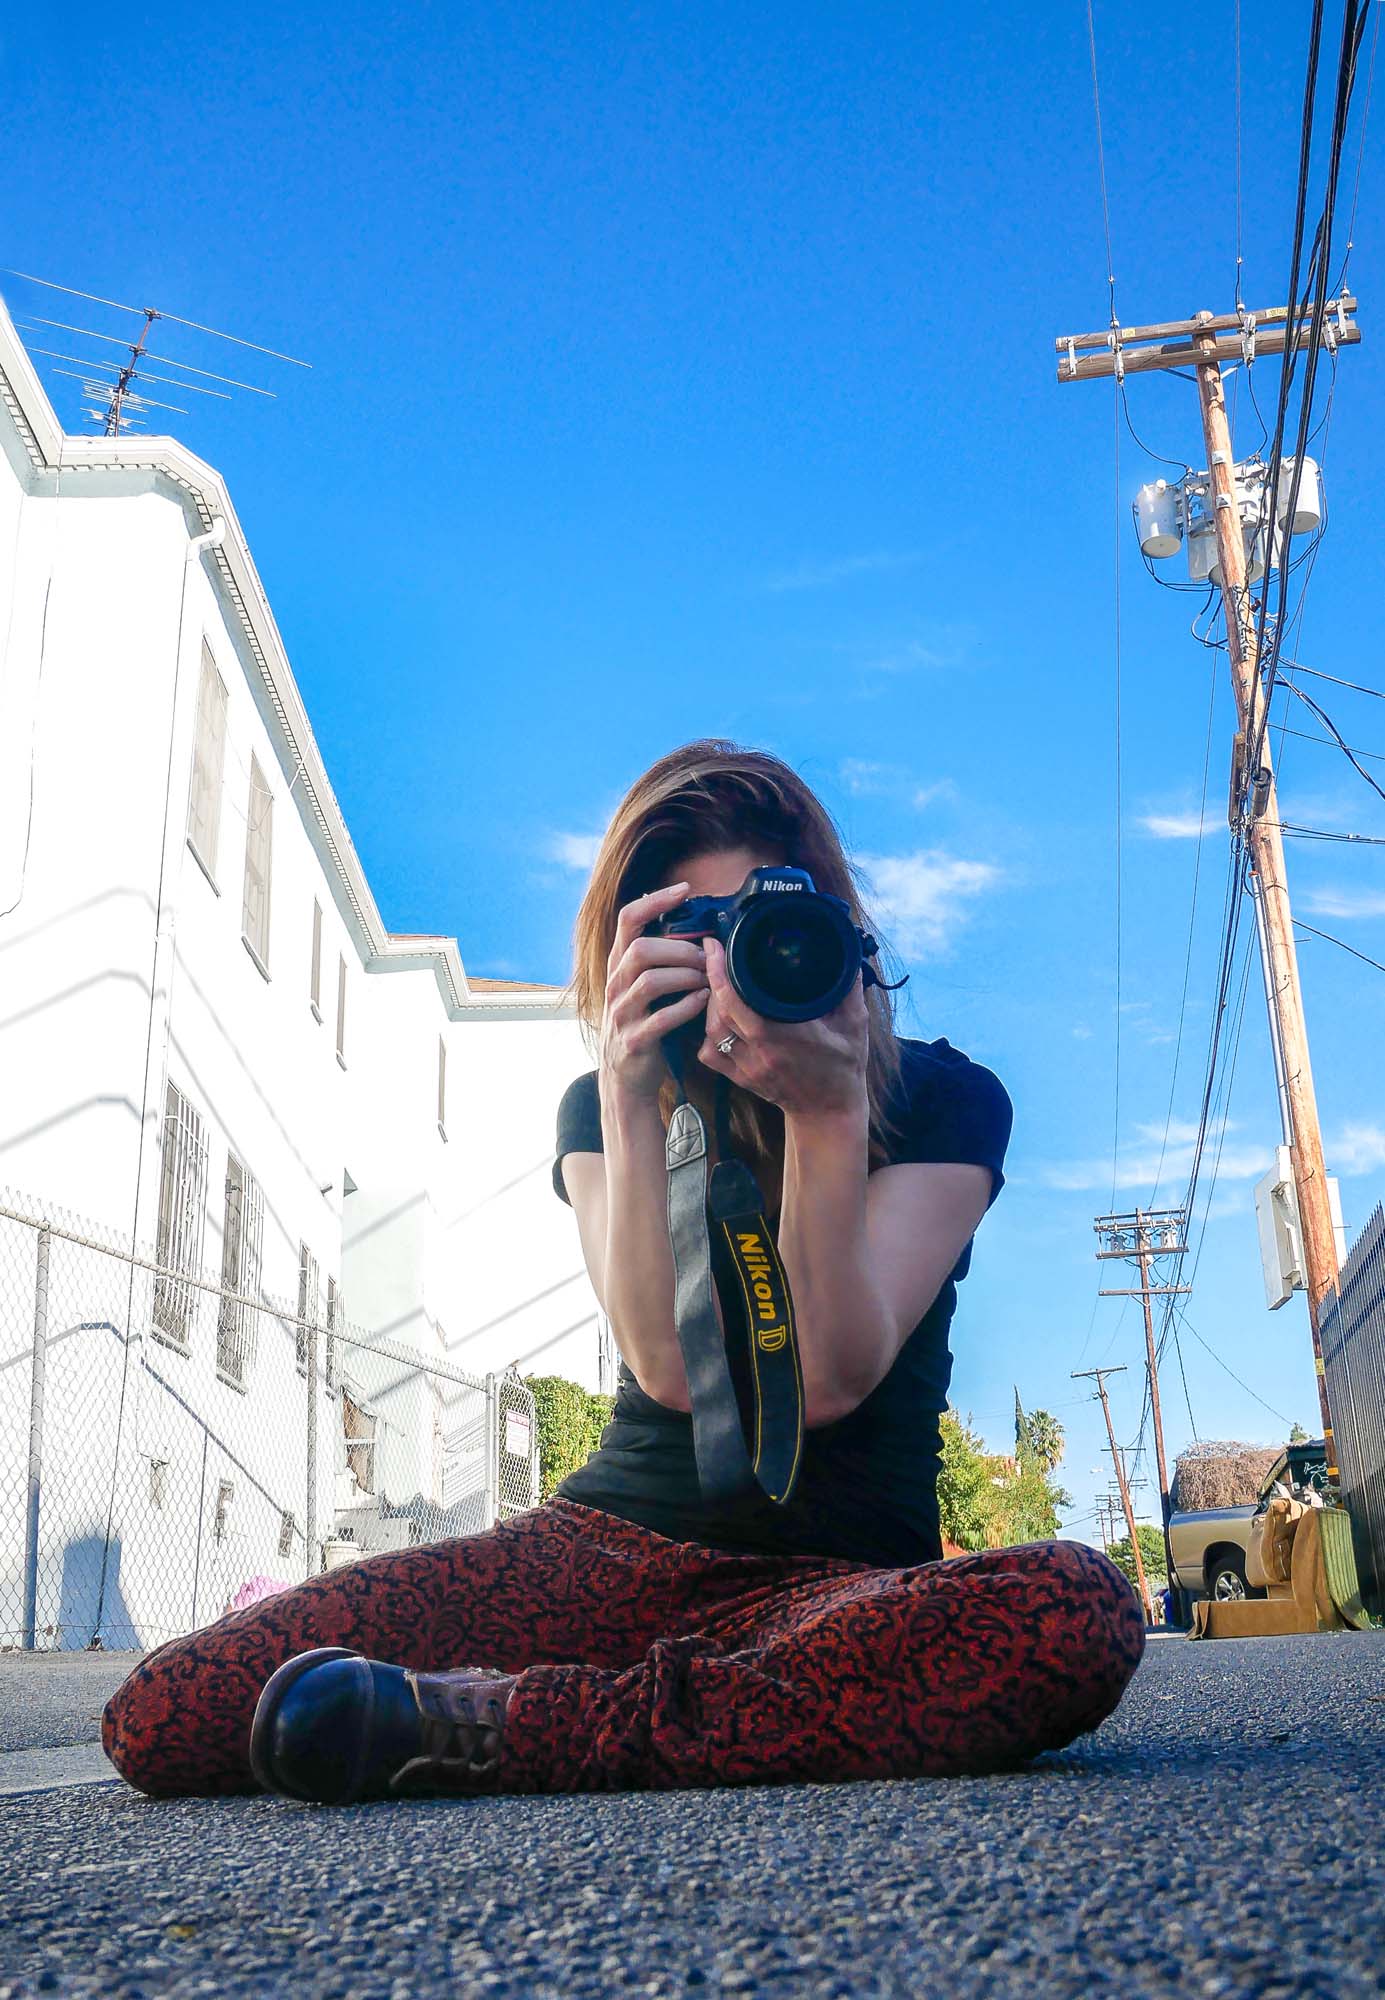 “My paparazzi is sexier than your paparazzi.” Here is my photographer friend, Jessica Sherman taking some photos of me (while I am taking some photos of her) in an alley behind Third Street. She is a professional portrait and entertainment photographer.